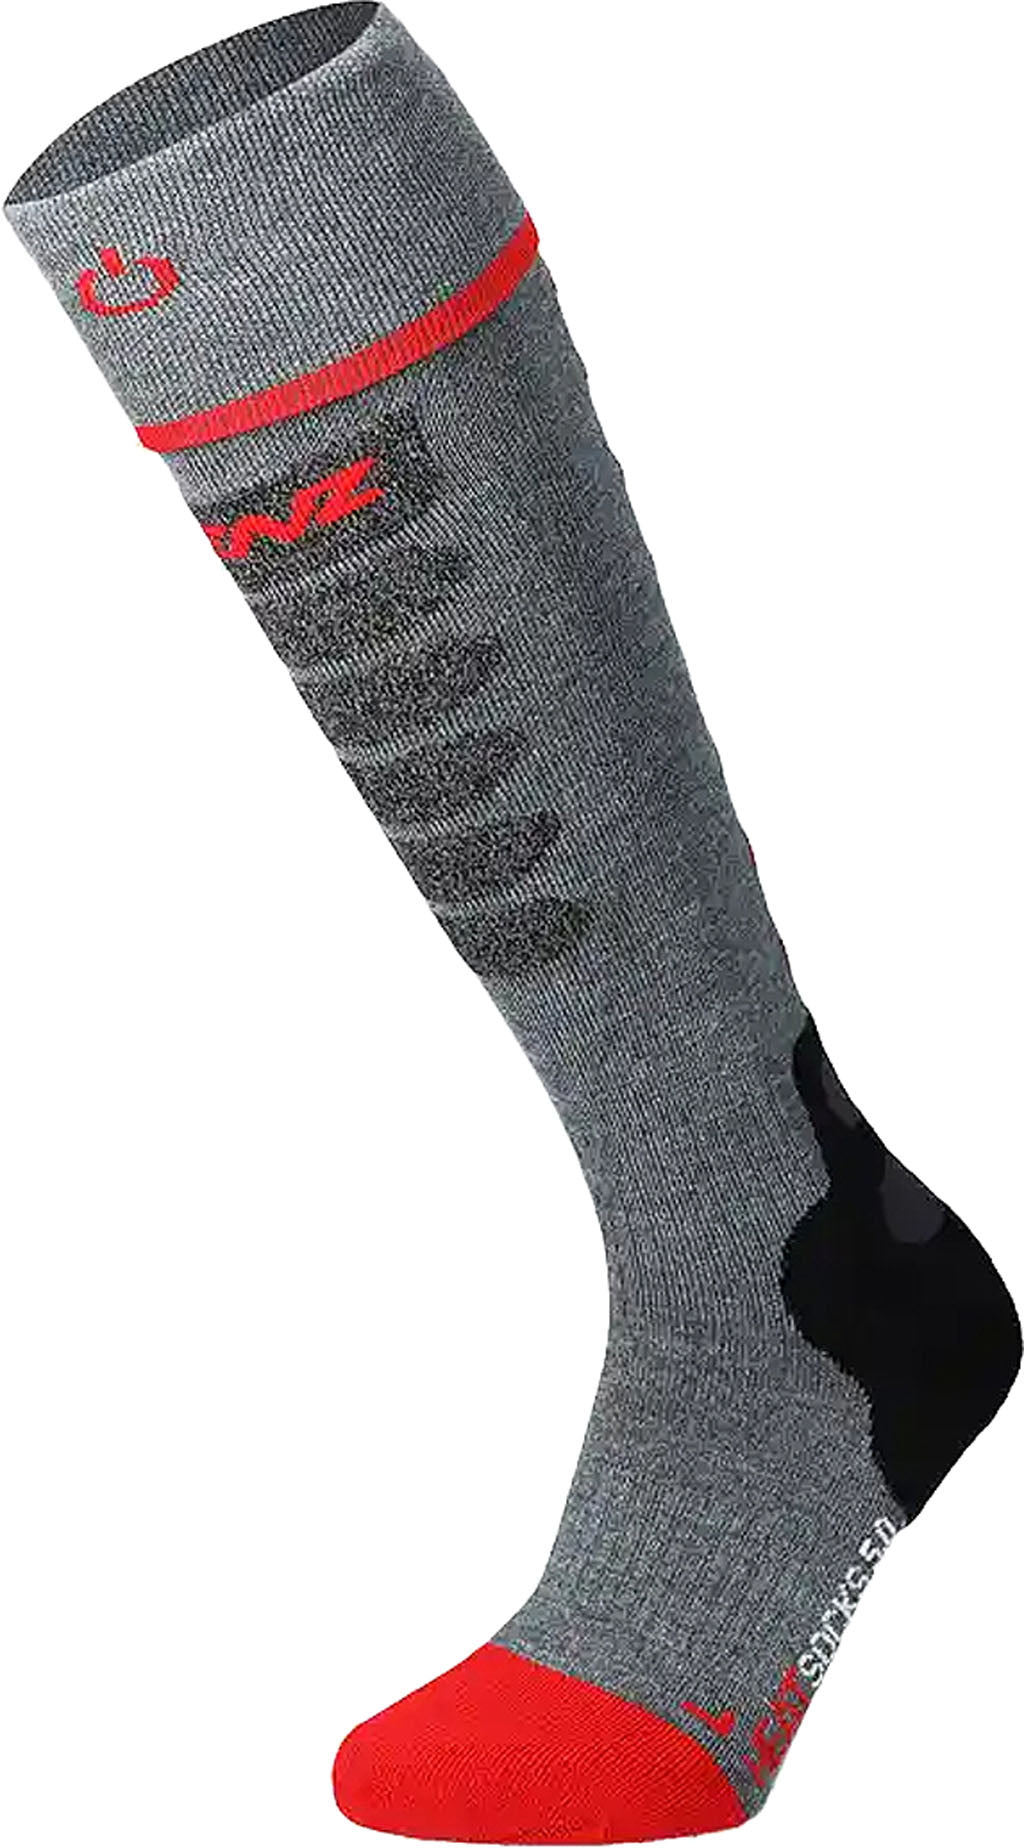 Women's Marled Insulated Thermal Socks with Fleece Lining